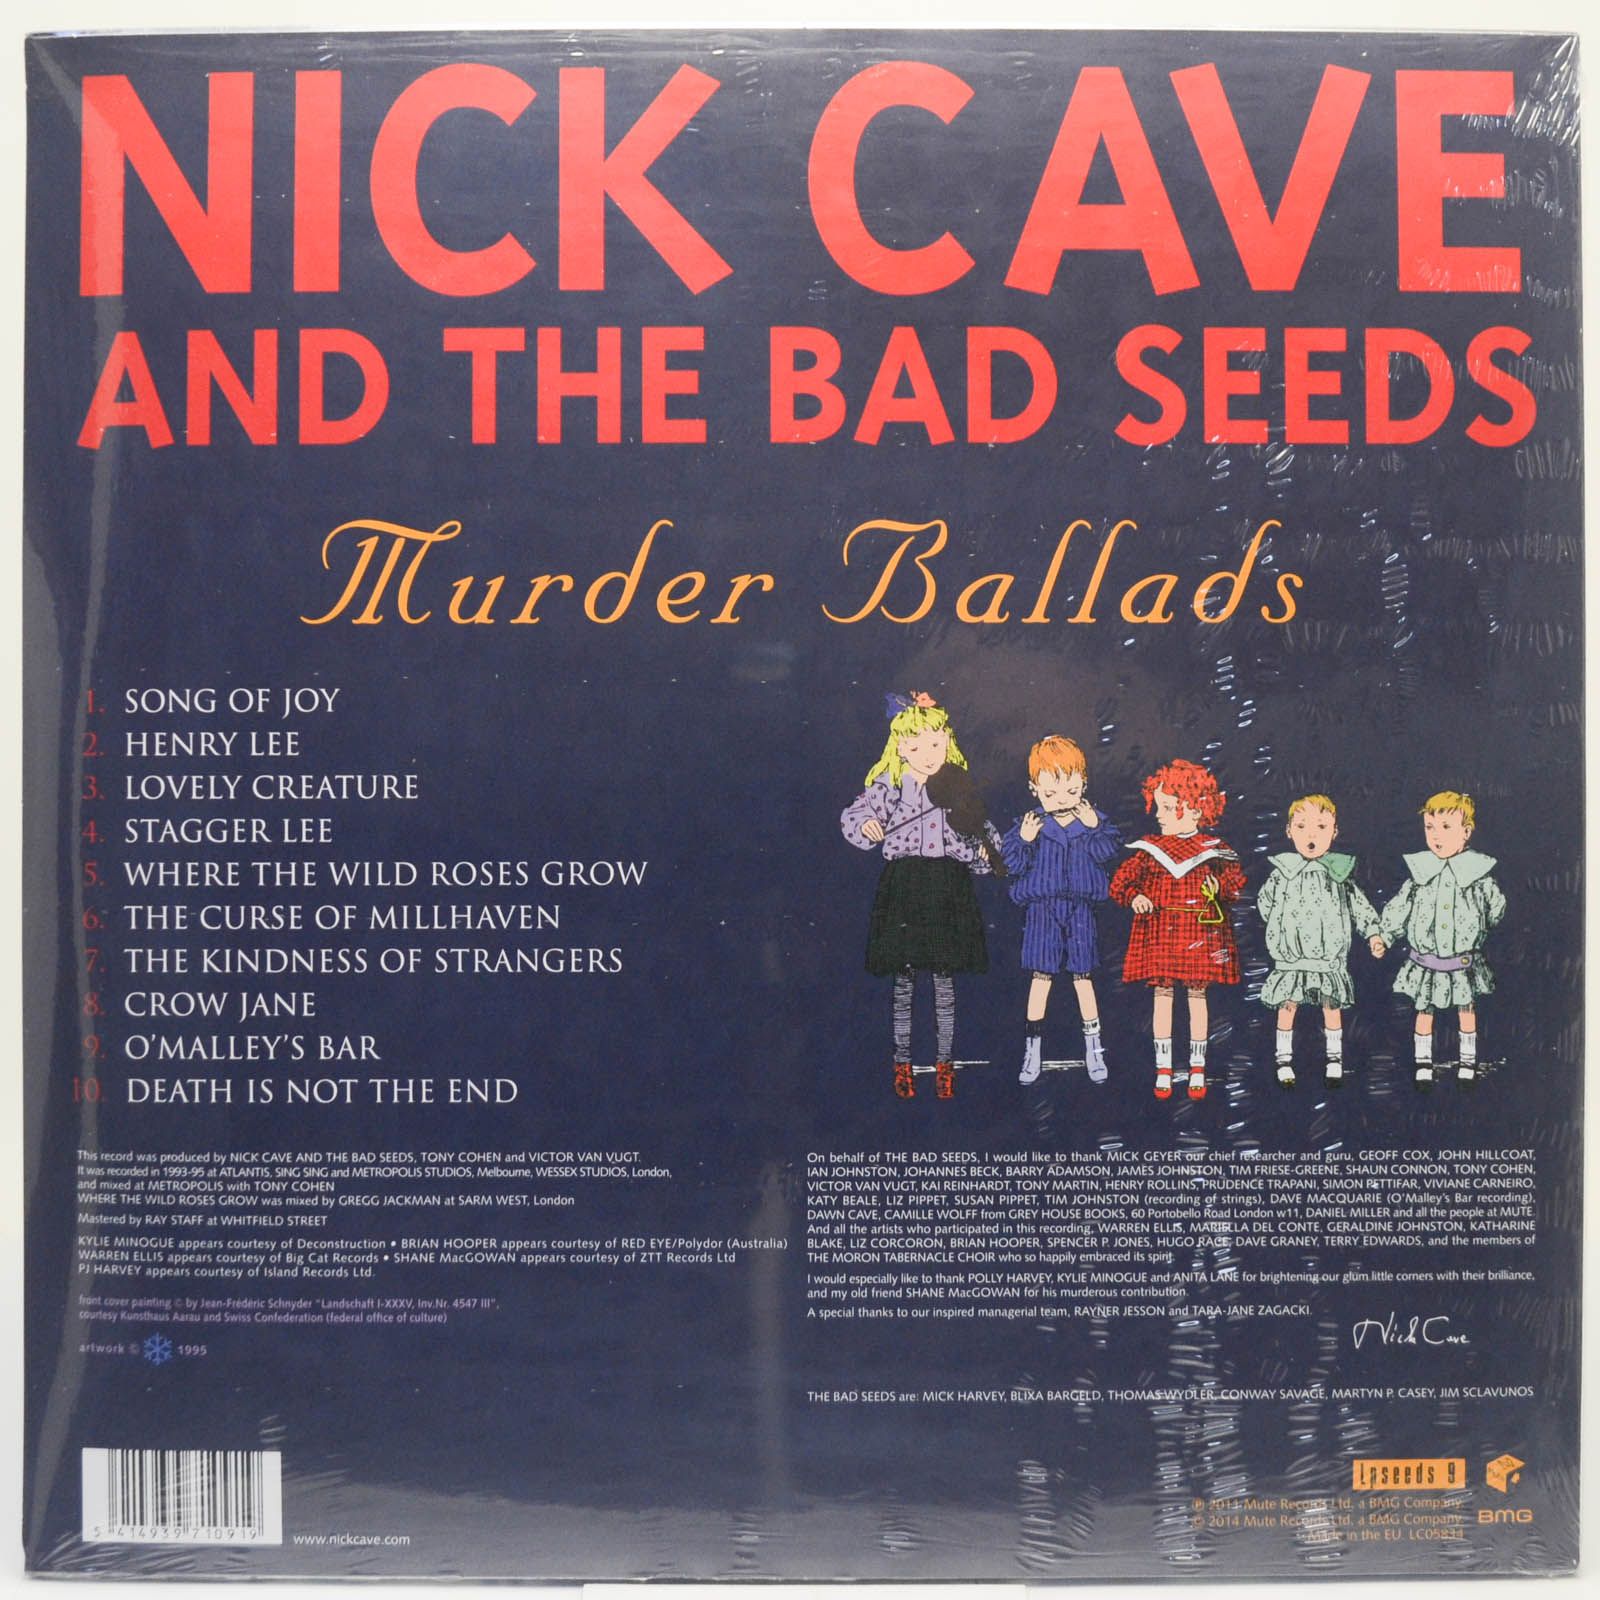 Nick Cave And The Bad Seeds — Murder Ballads (2LP), 1996